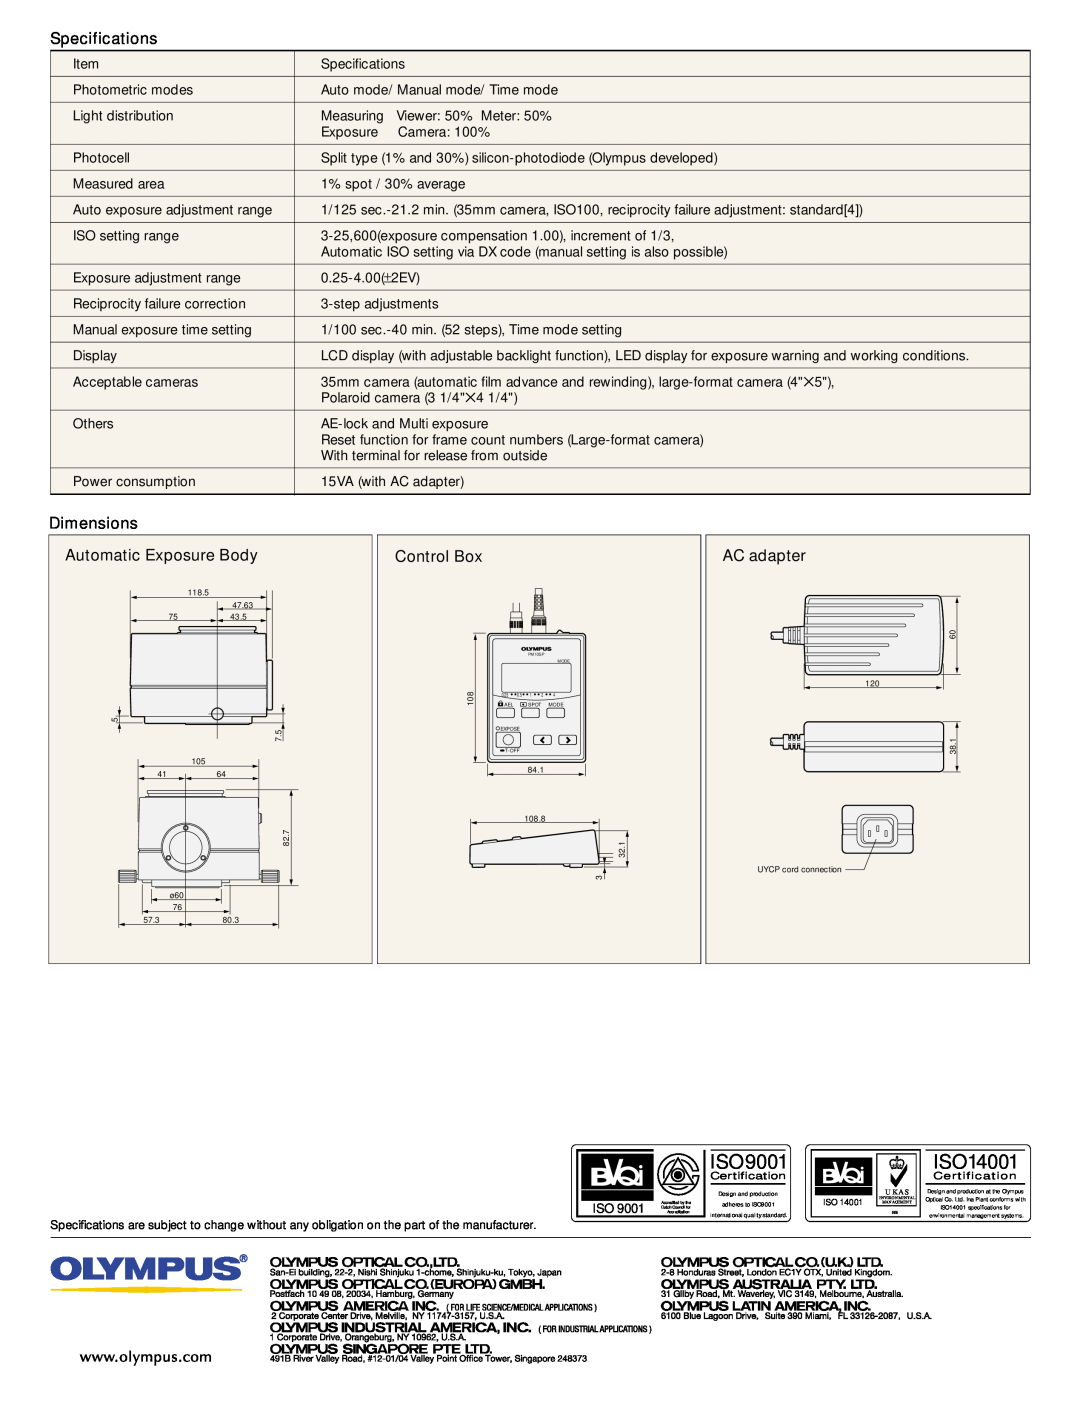 Olympus PM10SP manual Specifications, Dimensions, ISO9001, ISO14001 